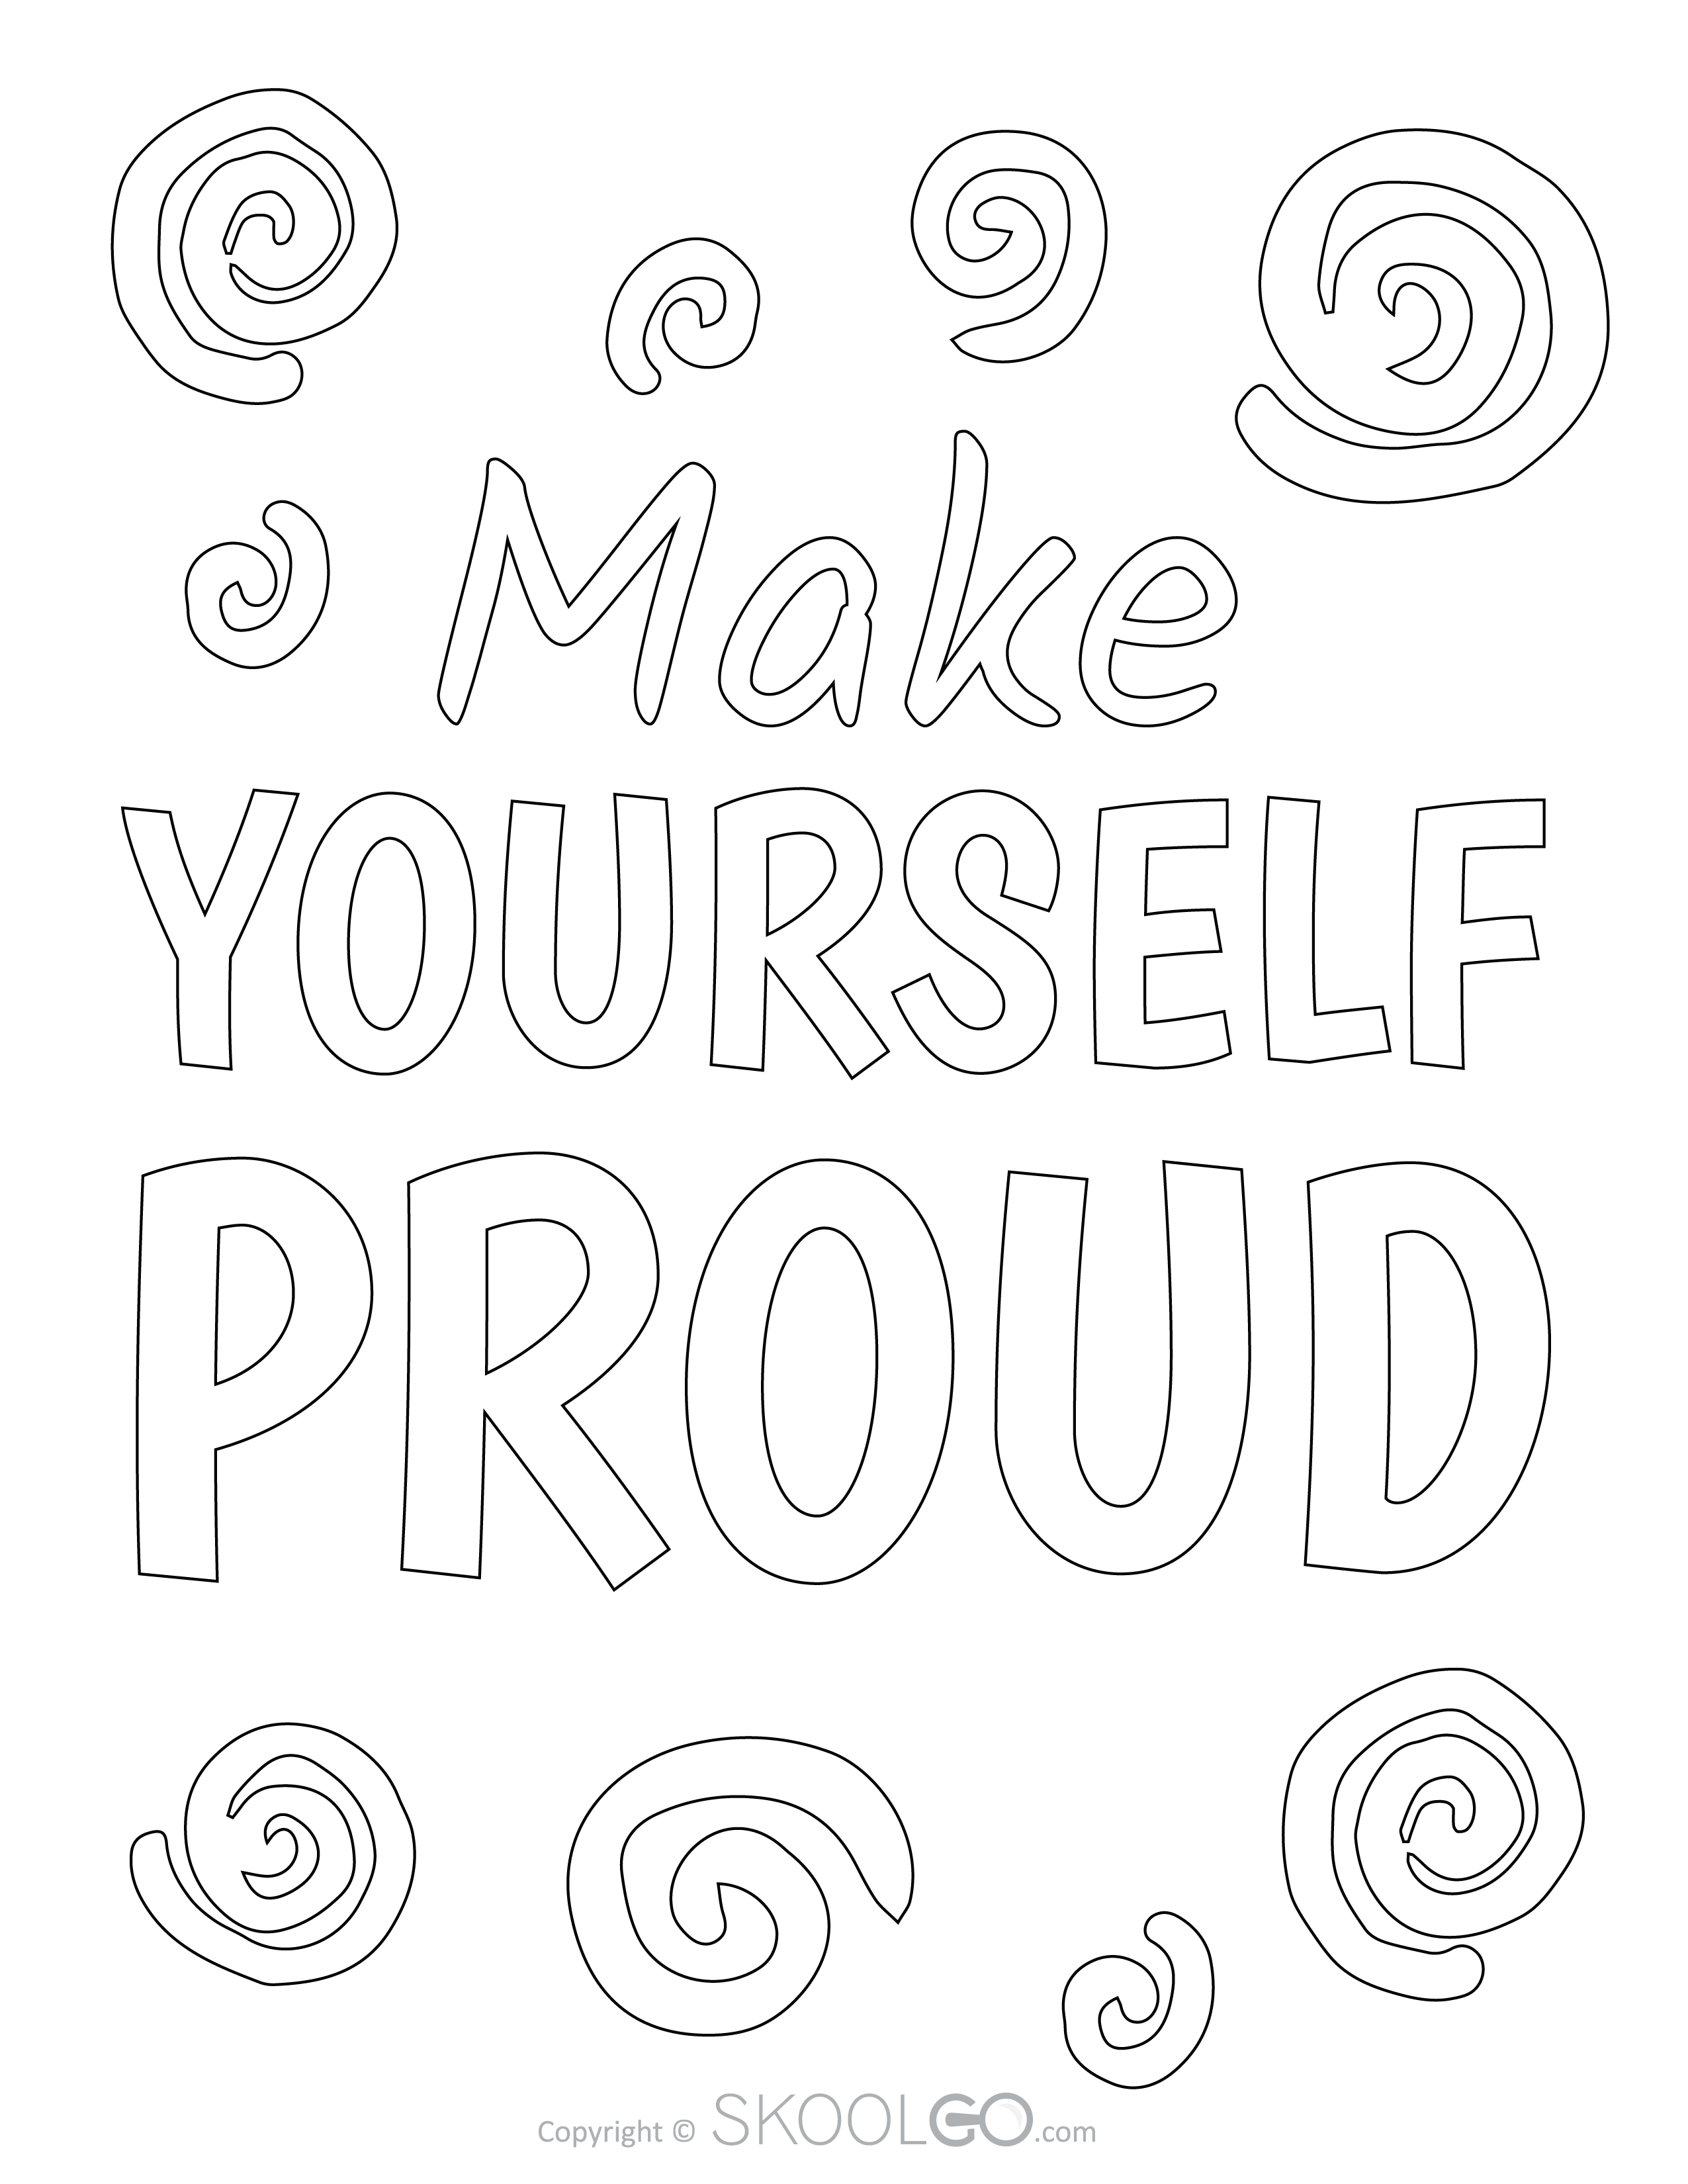 Make Yourself Proud - Free Coloring Version Poster